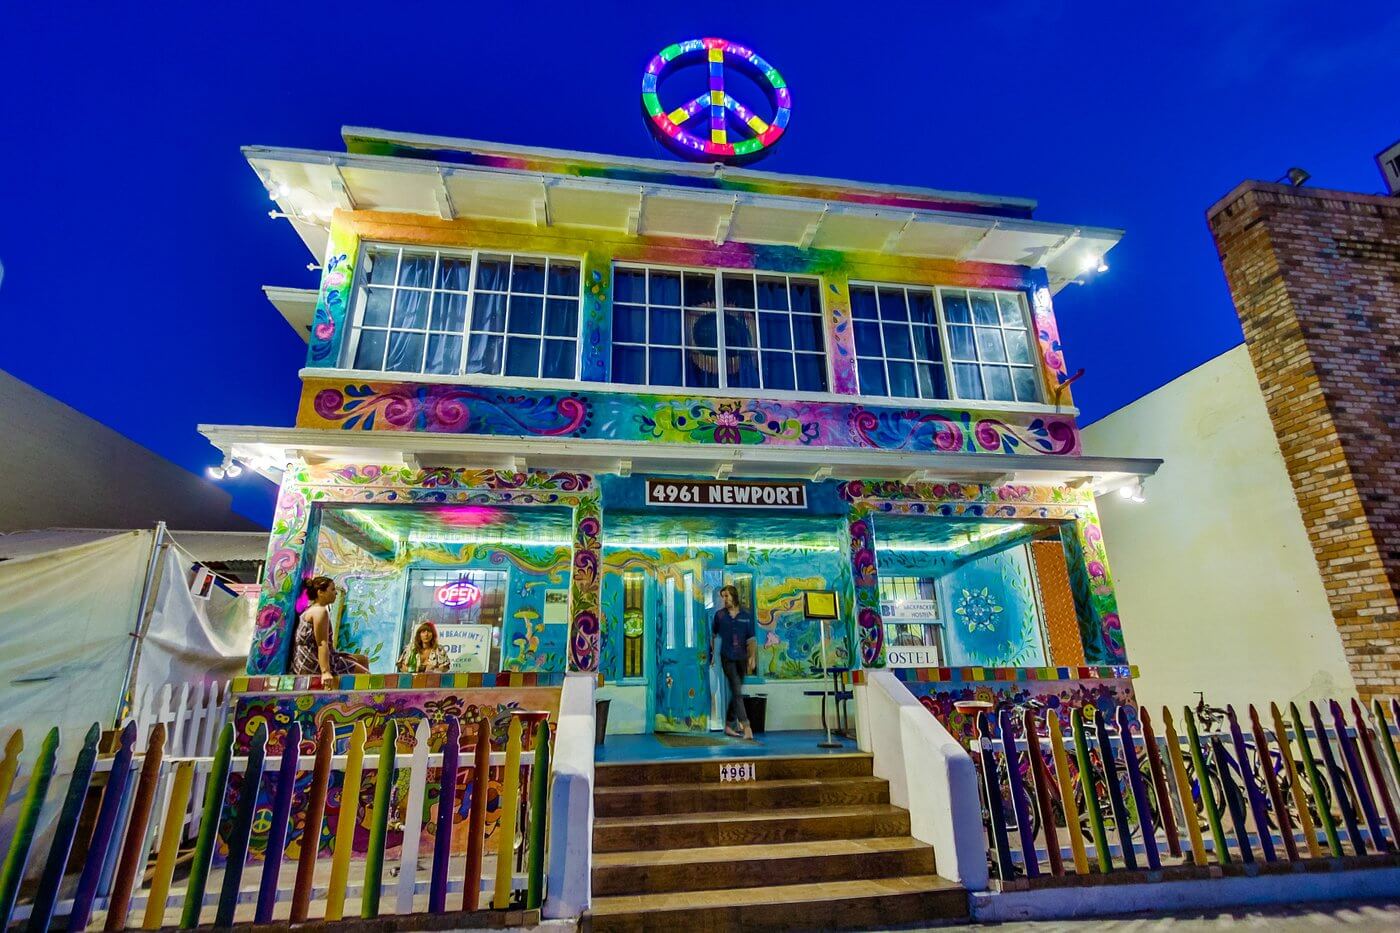 A fabulously colourful backpacker hostel in the USA